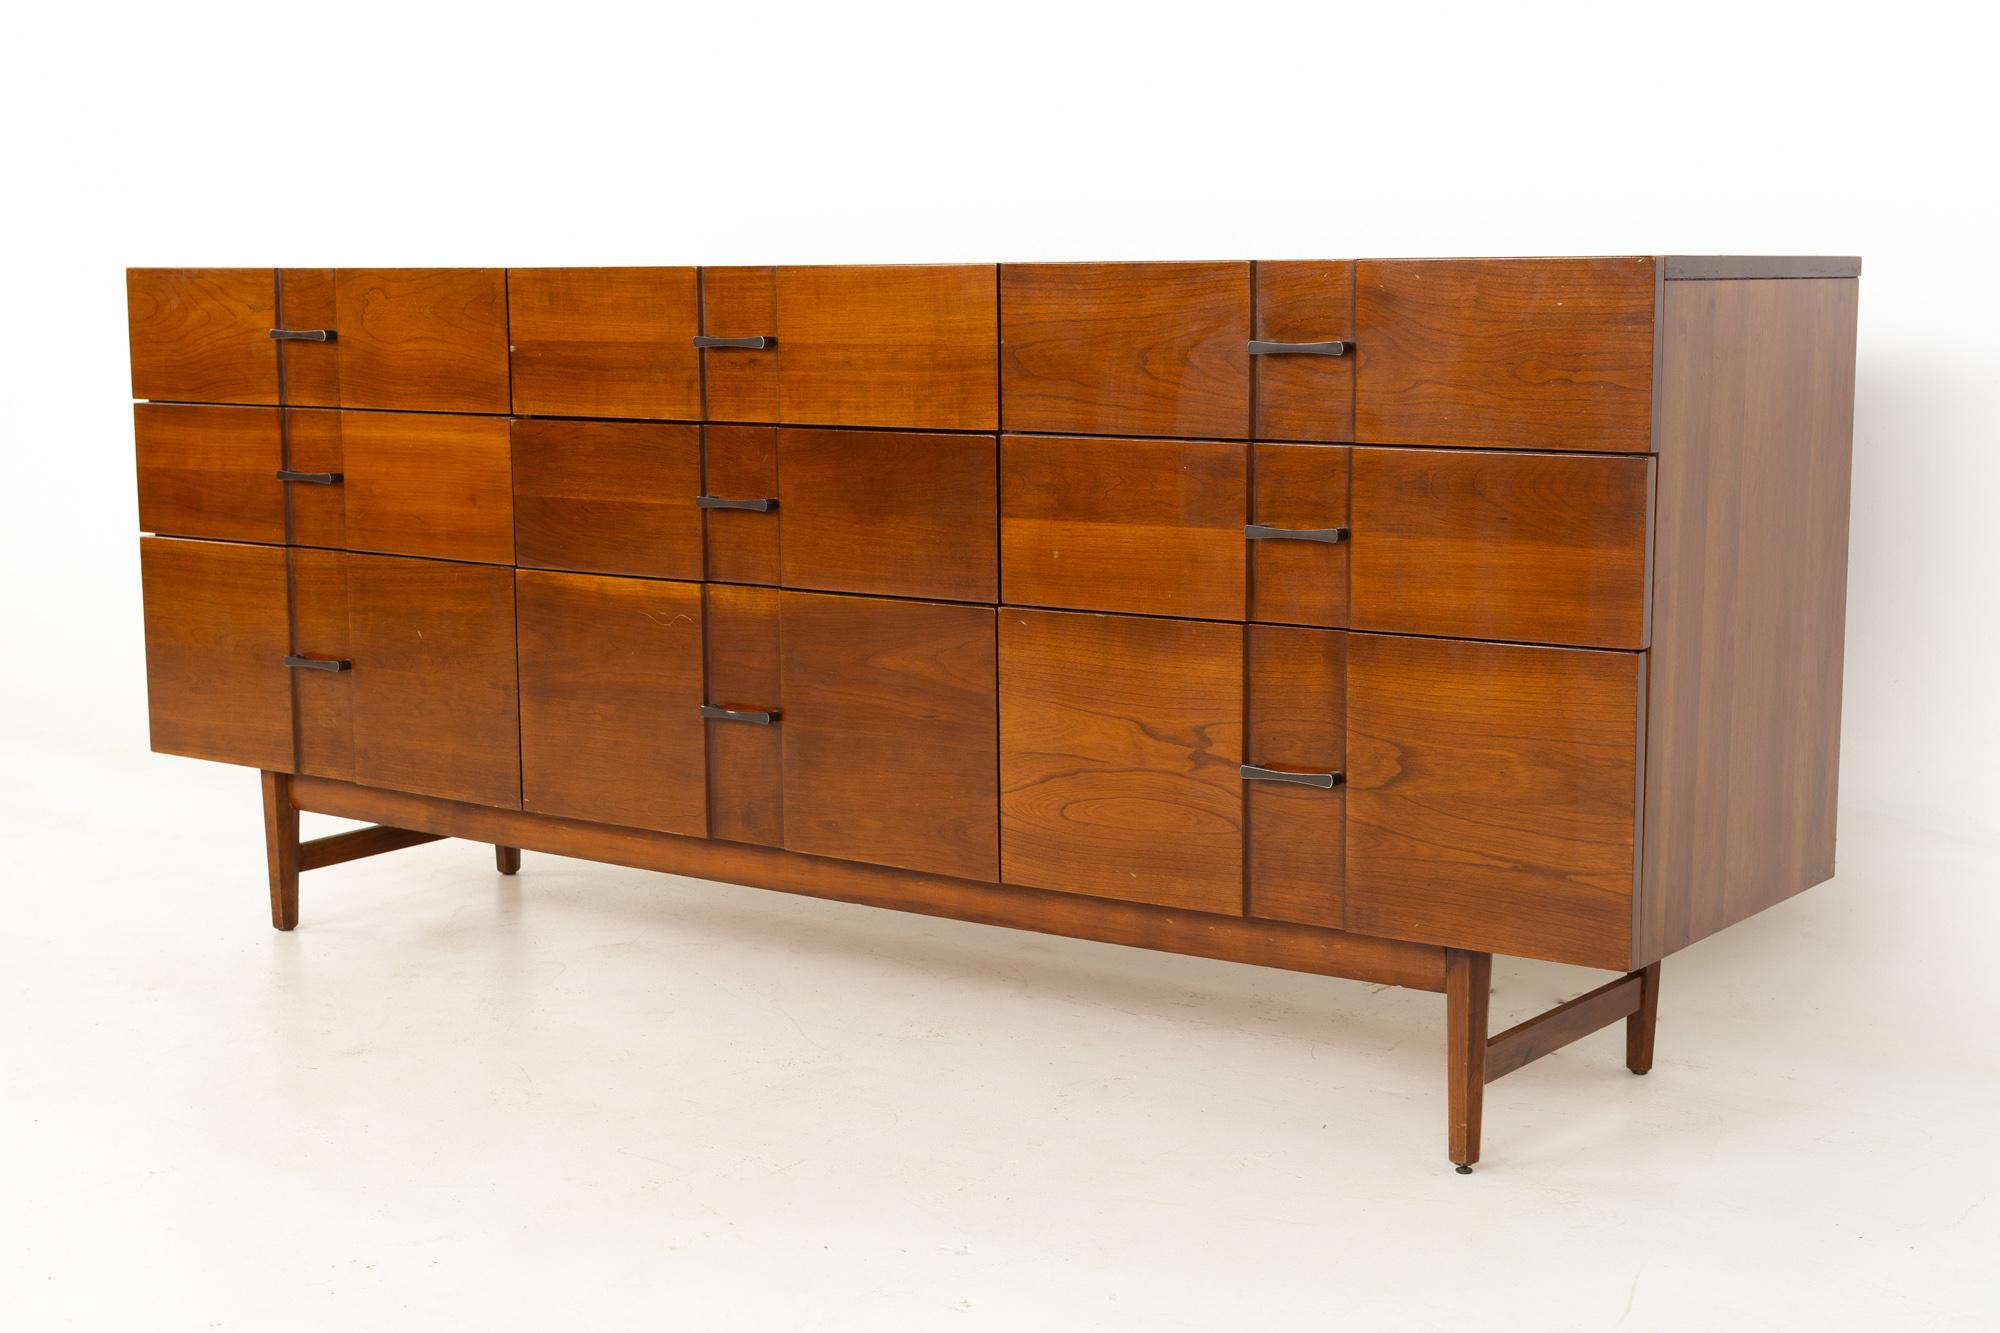 Kipp Stewart for American Design Foundation Group mid century solid cherry 9 drawer lowboy dresser
This piece measures: 72 wide x 18.5 deep x 30 inches high

All pieces of furniture can be had in what we call restored vintage condition. That